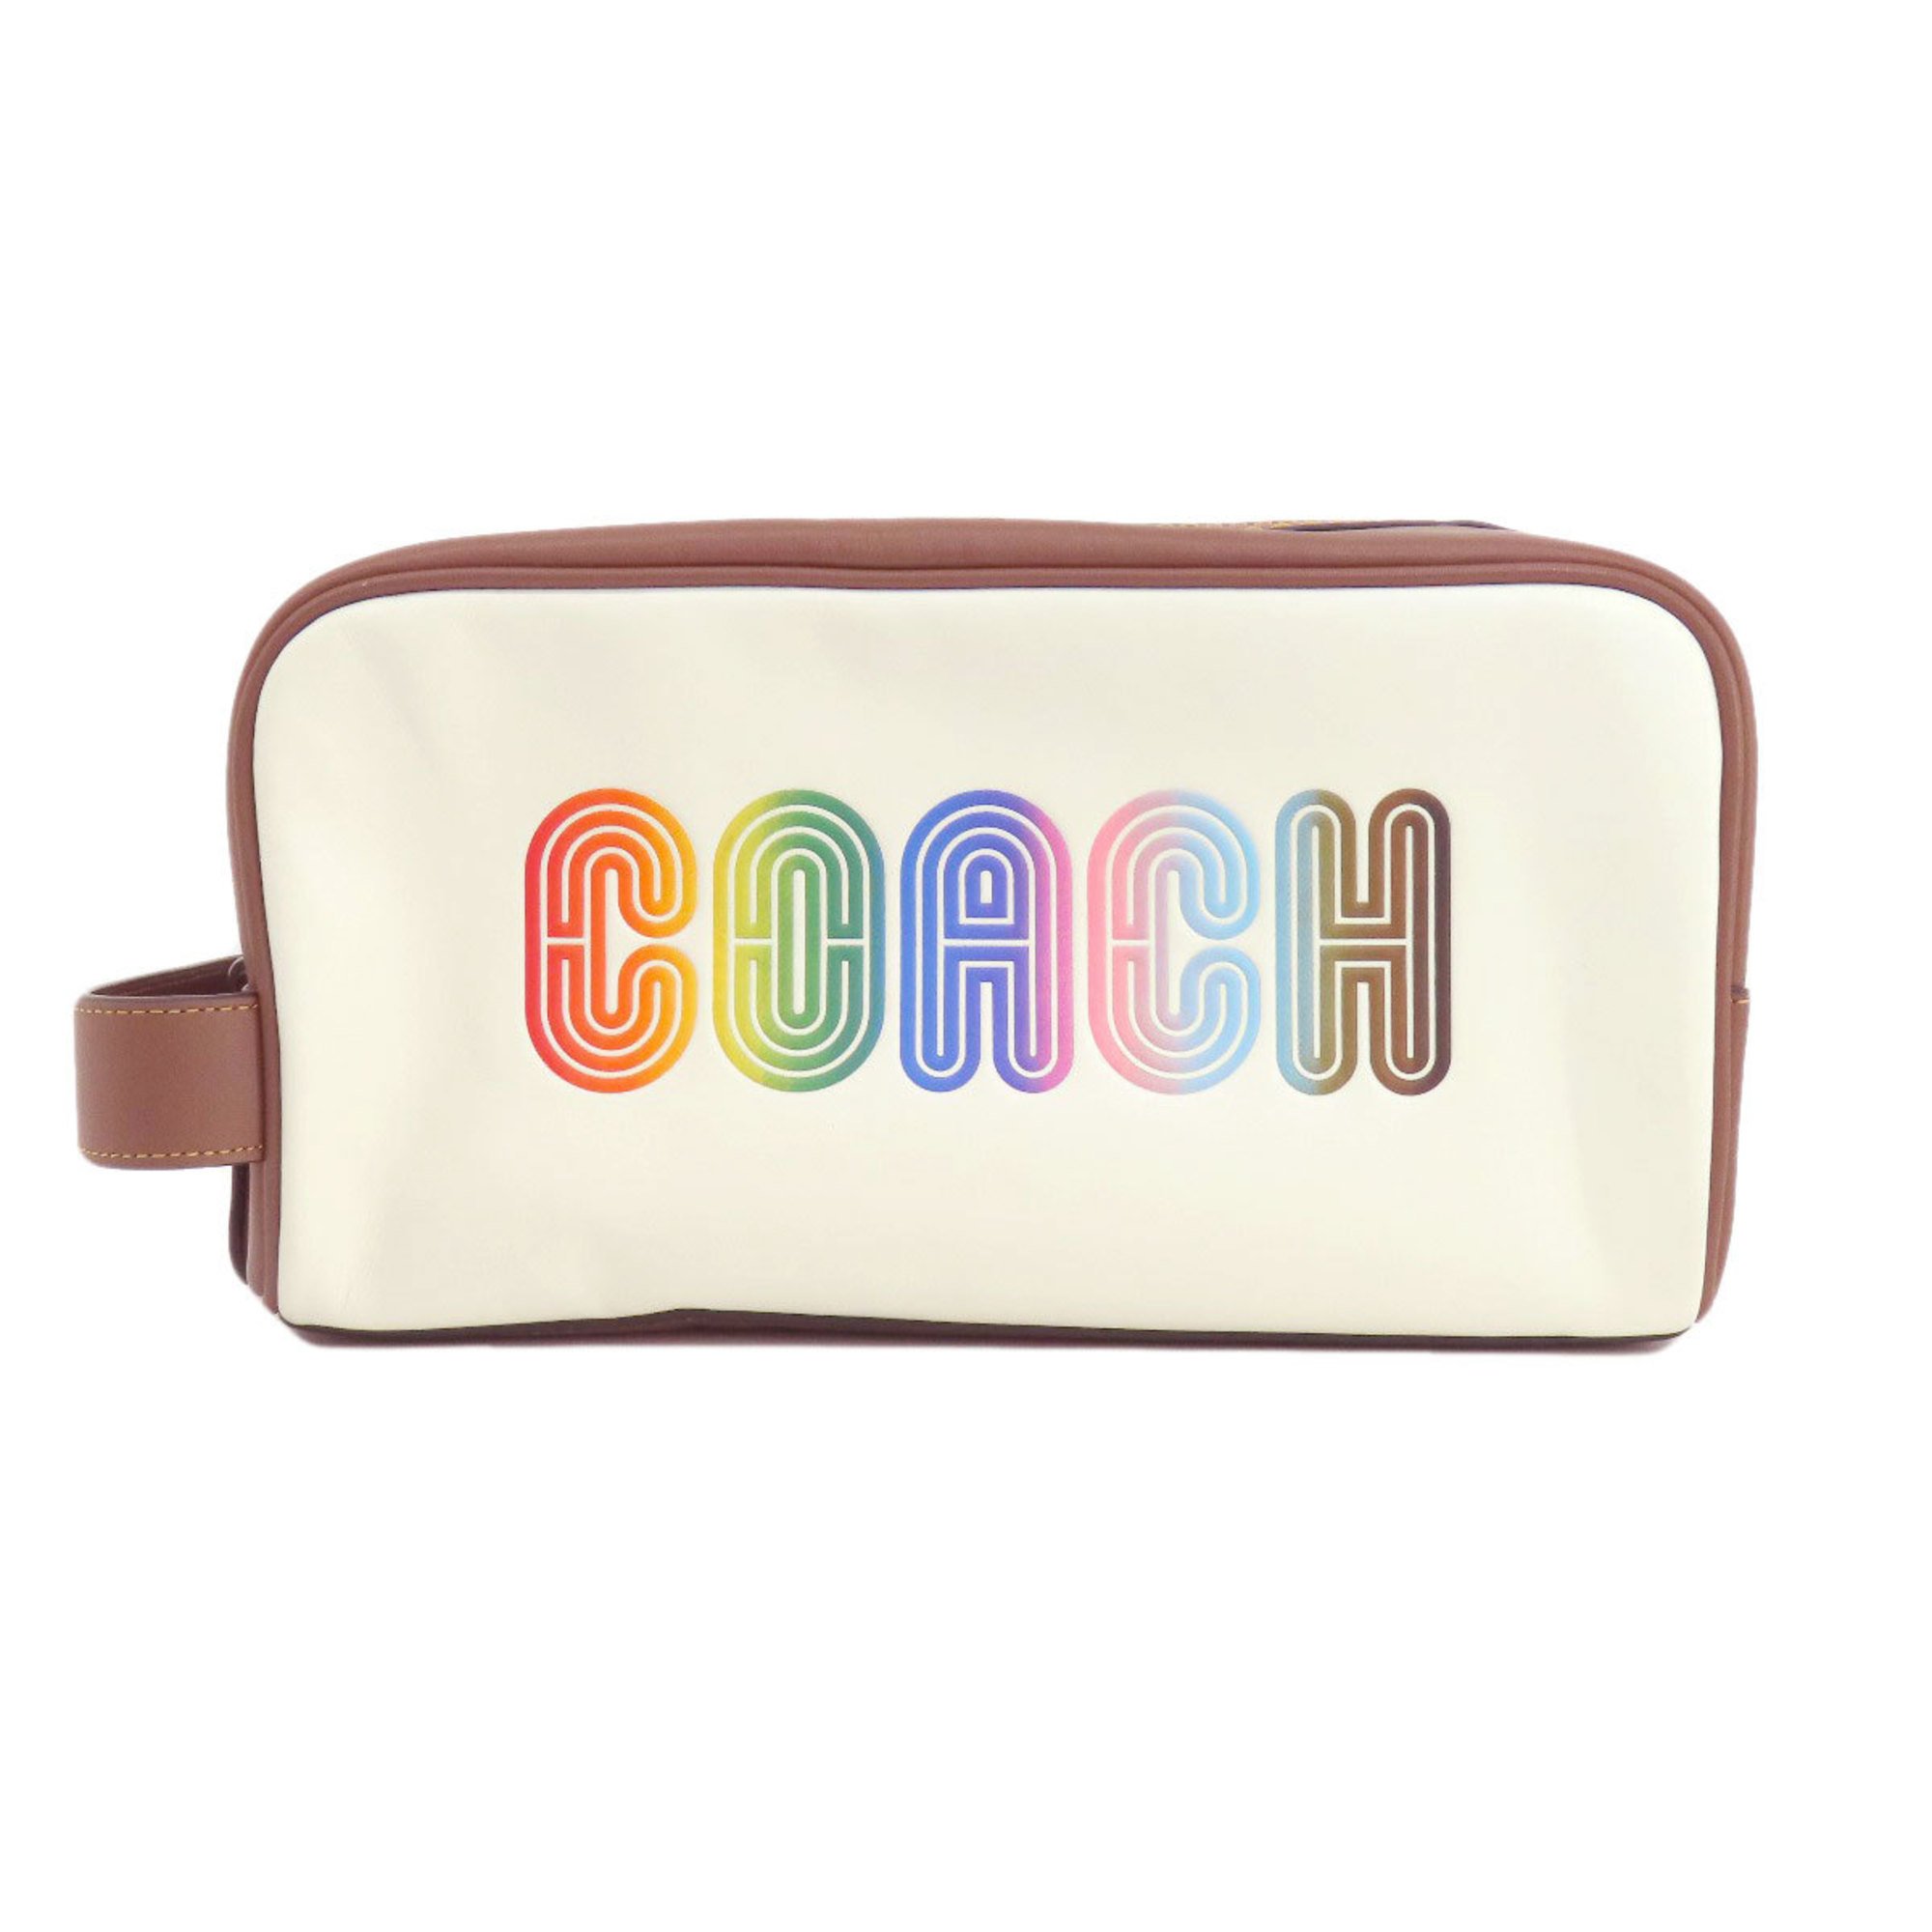 Coach C9859 Large Kit with Rainbow Second Bag Leather Women's COACH